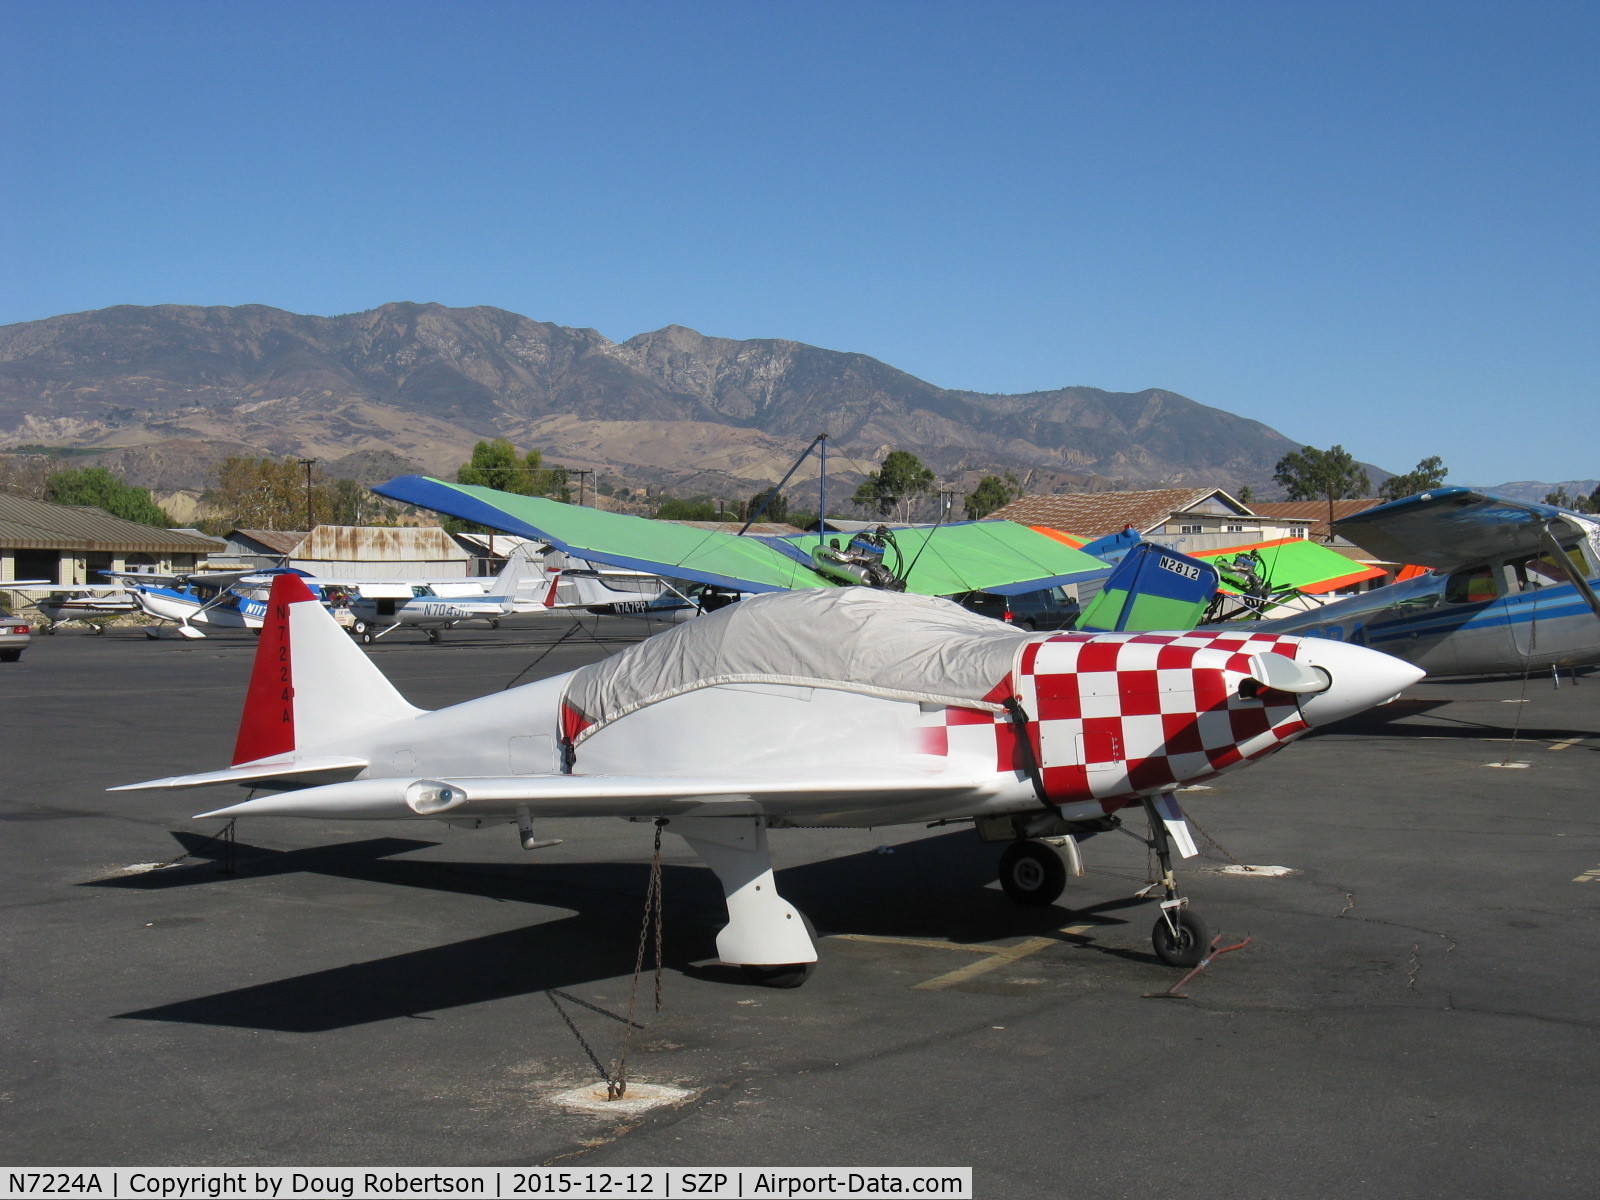 N7224A, 1998 Osprey GP-4 C/N 8, 1998 Baum PEREIRA GP4, Lycoming IO-360-A1A 200 Hp, 240 mph cruise, 2,200 fpm rate of climb, 1,200 mile range, all wood, retractable tri-gear, Experimental class speedster